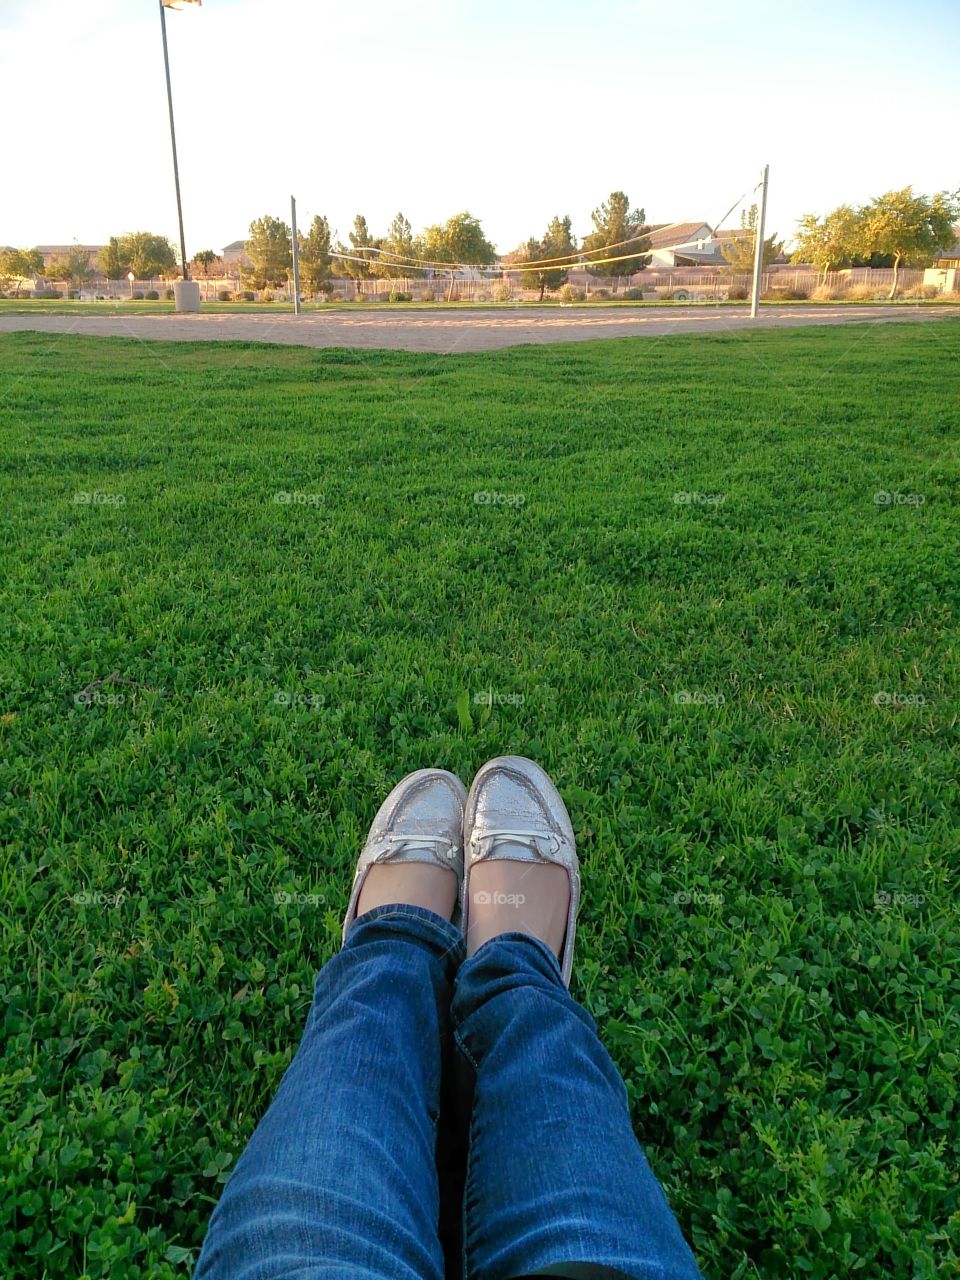 Relaxing at the park. The park in my neighborhood has nice grass